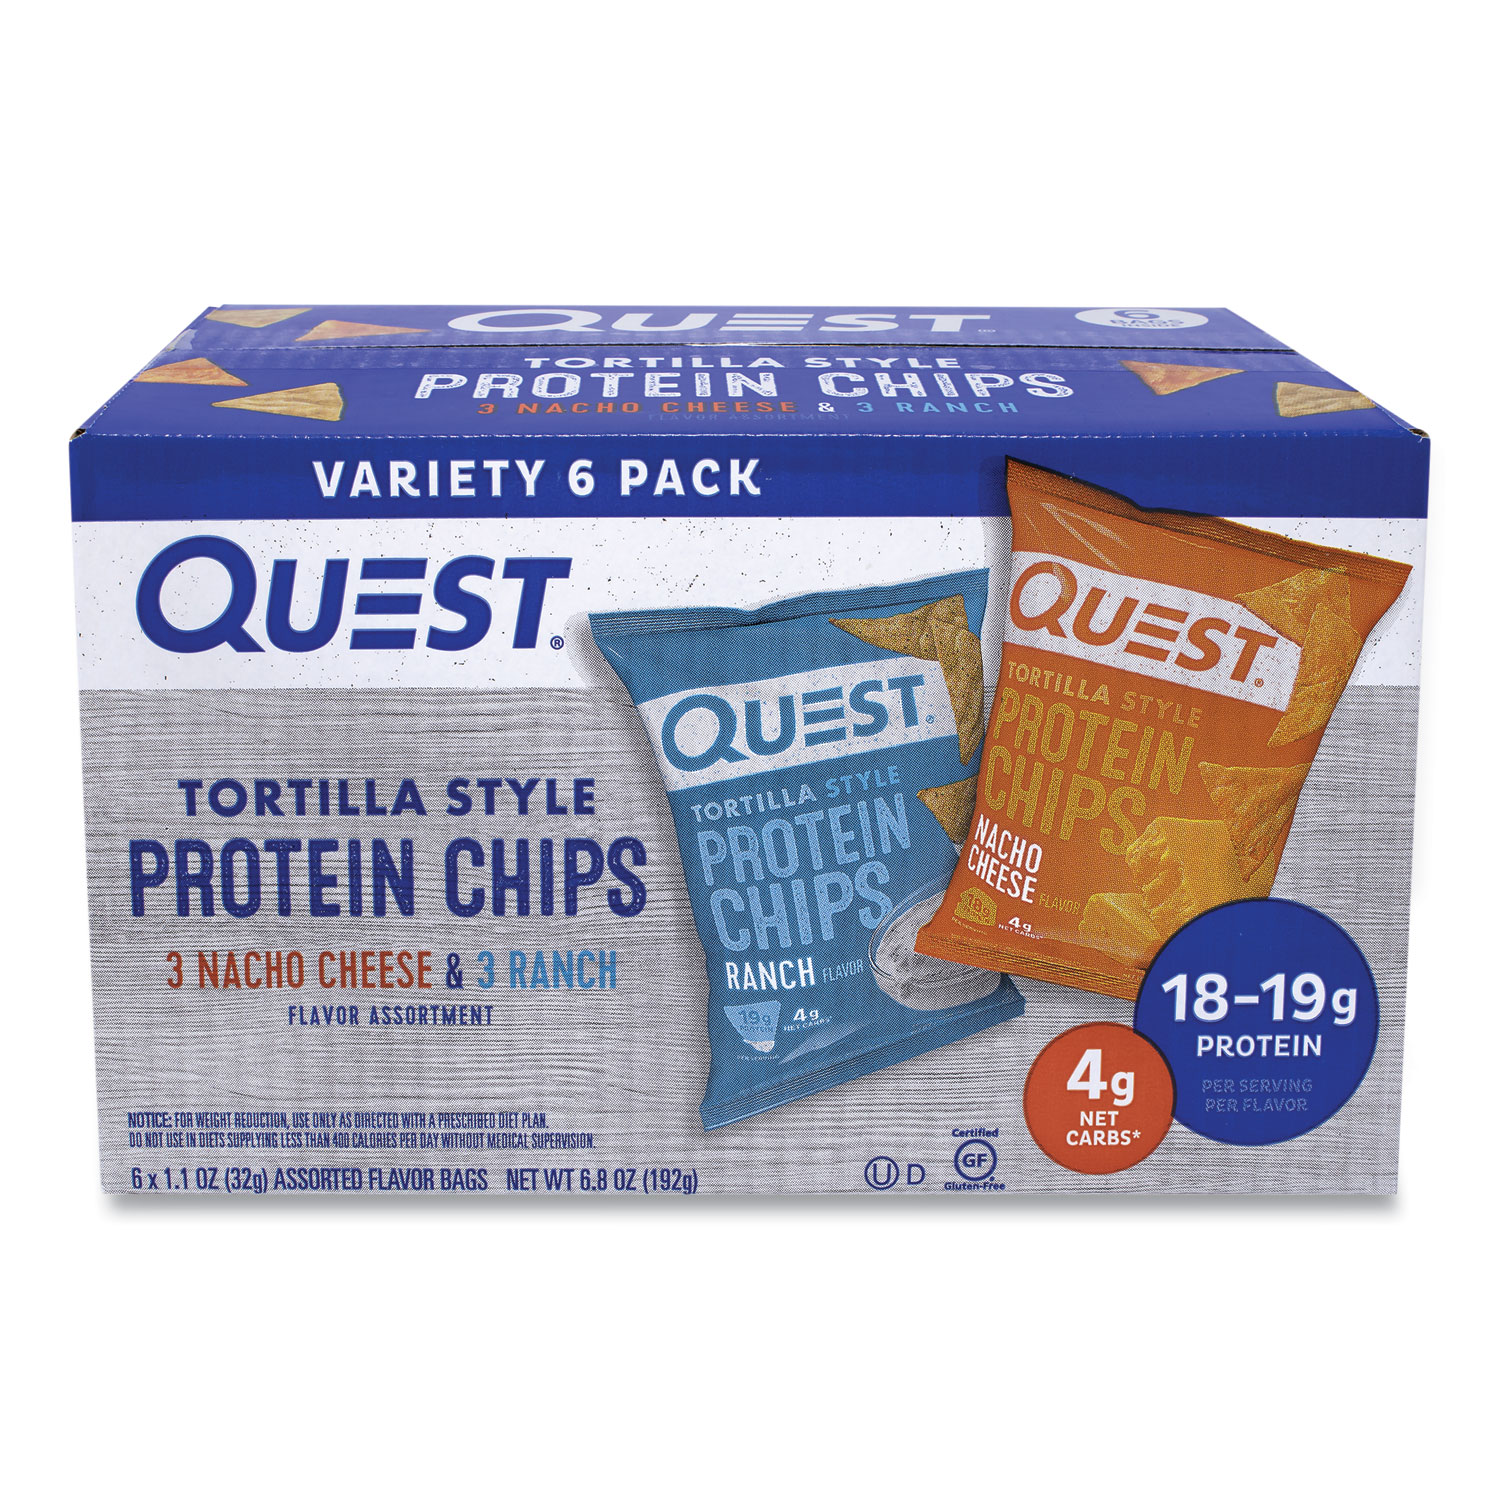  Quest 00761 Tortilla Style Protein Chips, Nacho Cheese/Ranch, 1.1 oz Bag, 6/Box, Free Delivery in 1-4 Business Days (GRR22001145) 